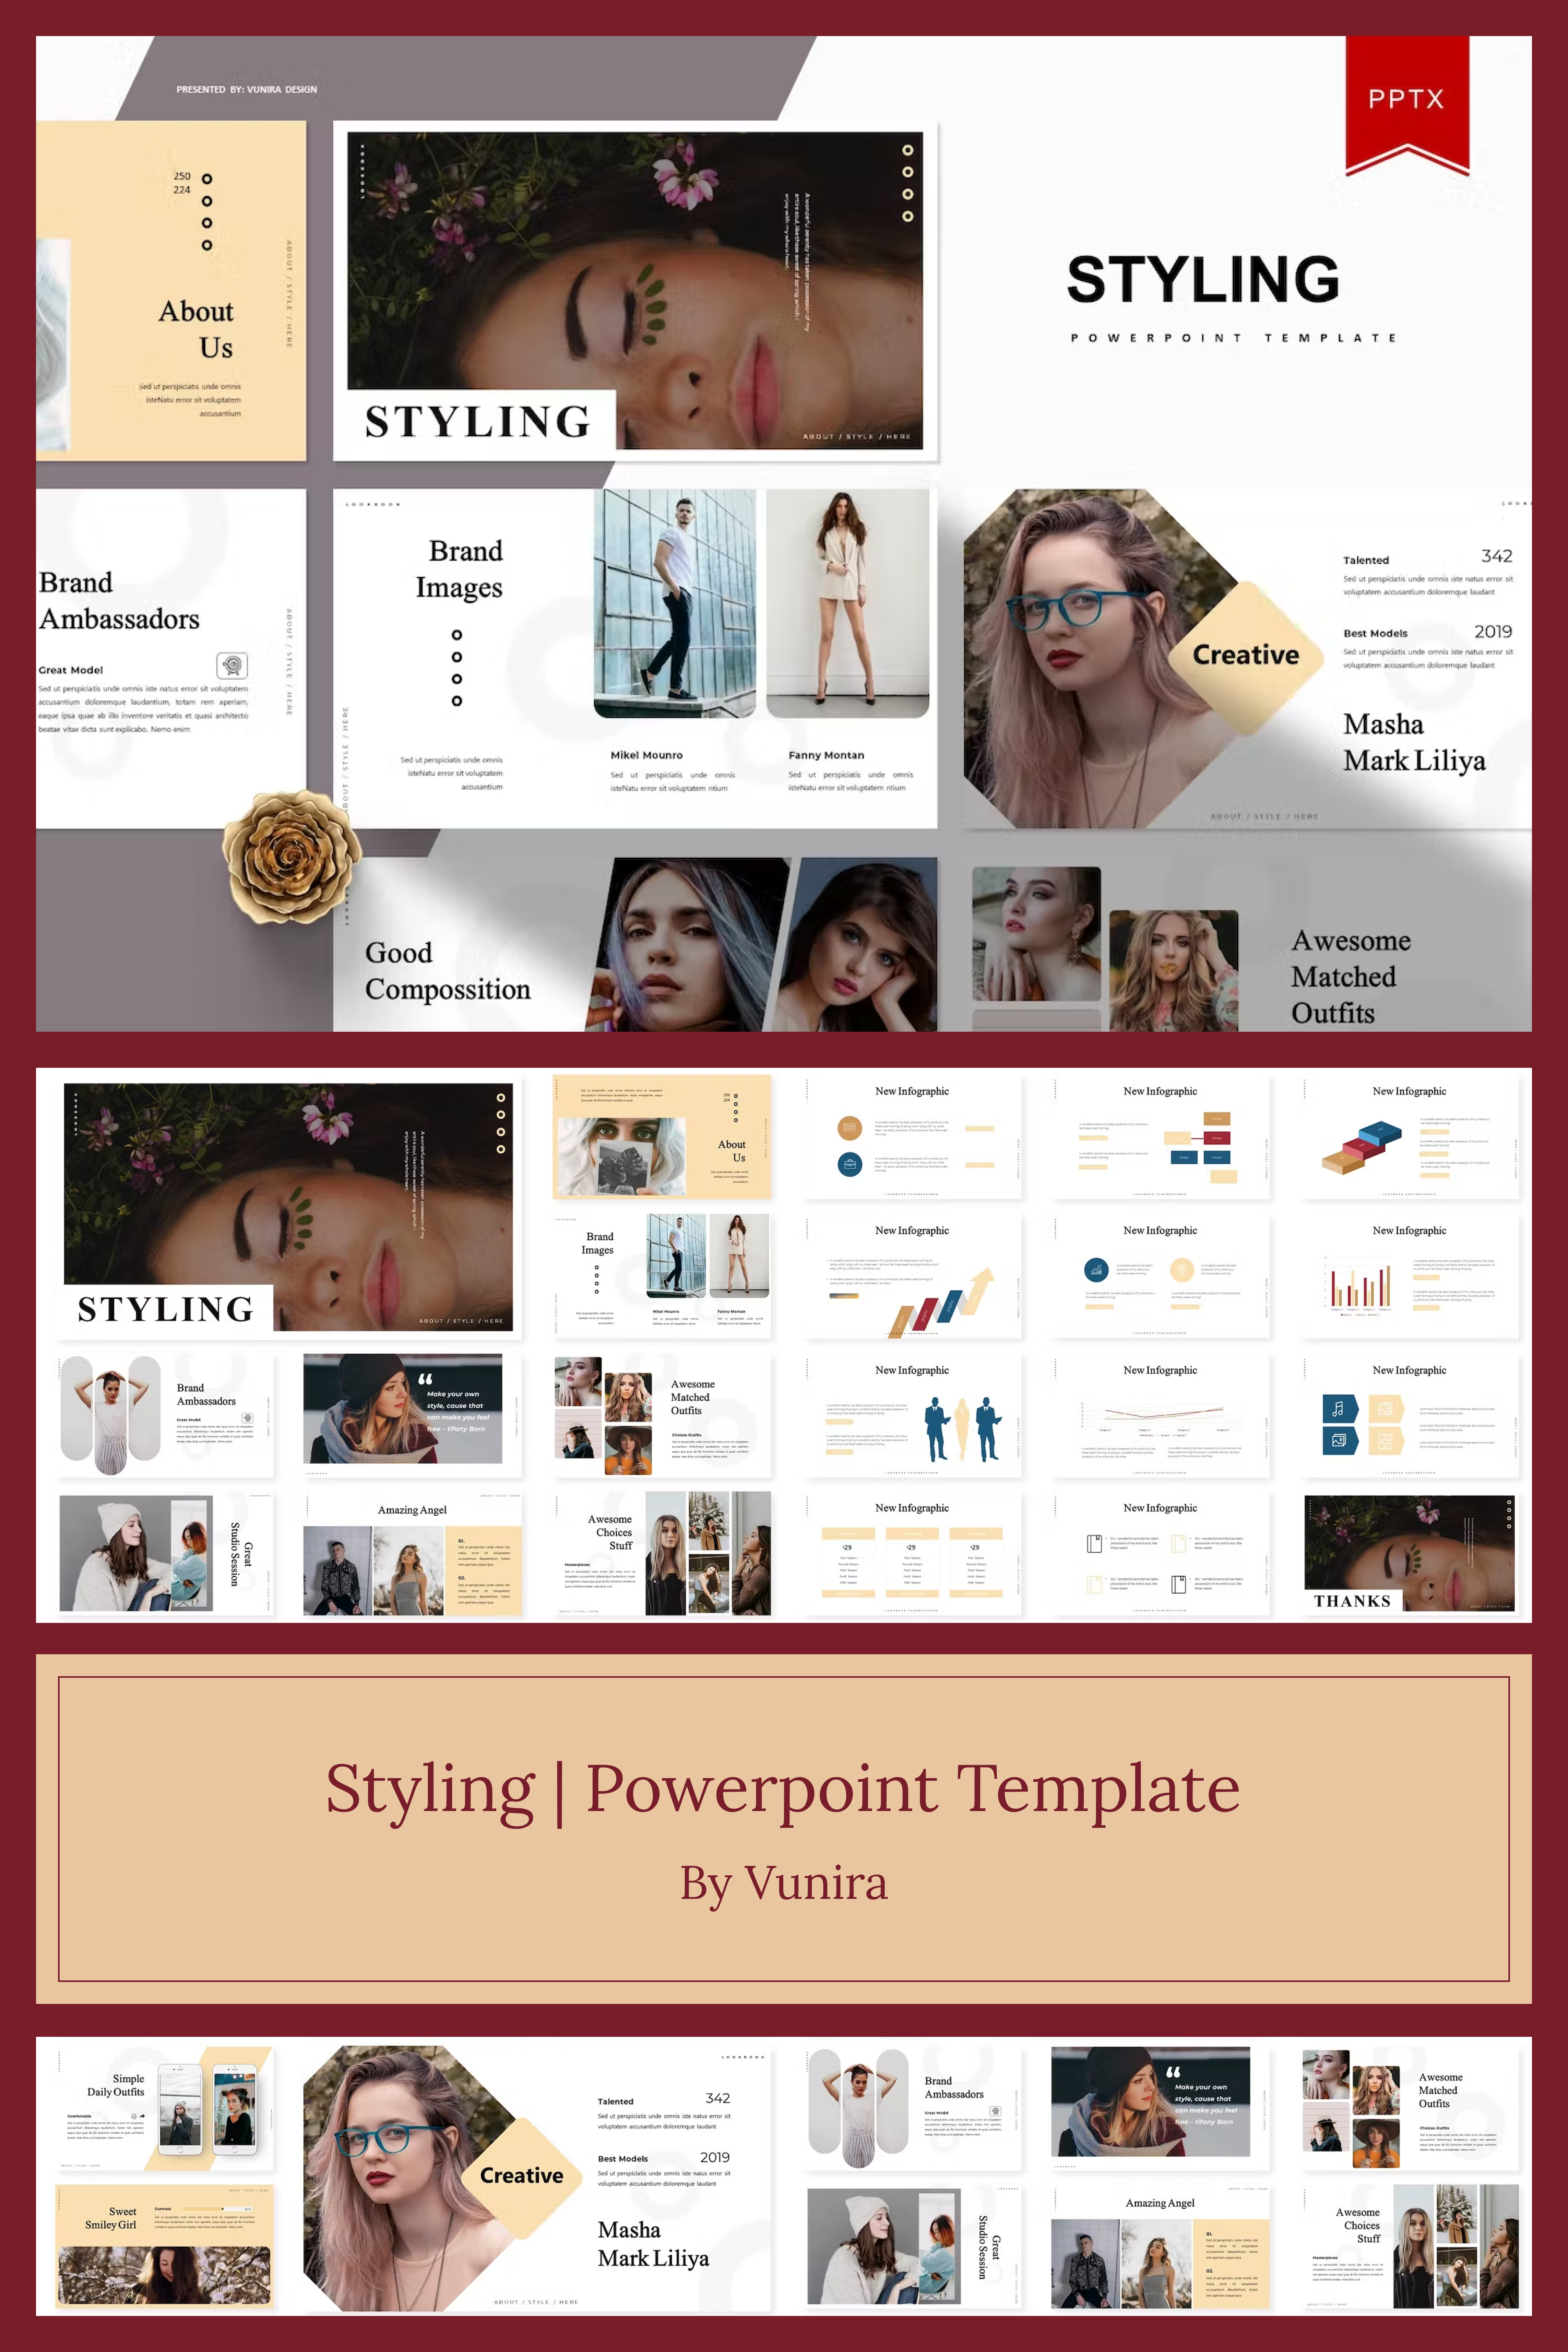 Styling powerpoint template of pinterest.